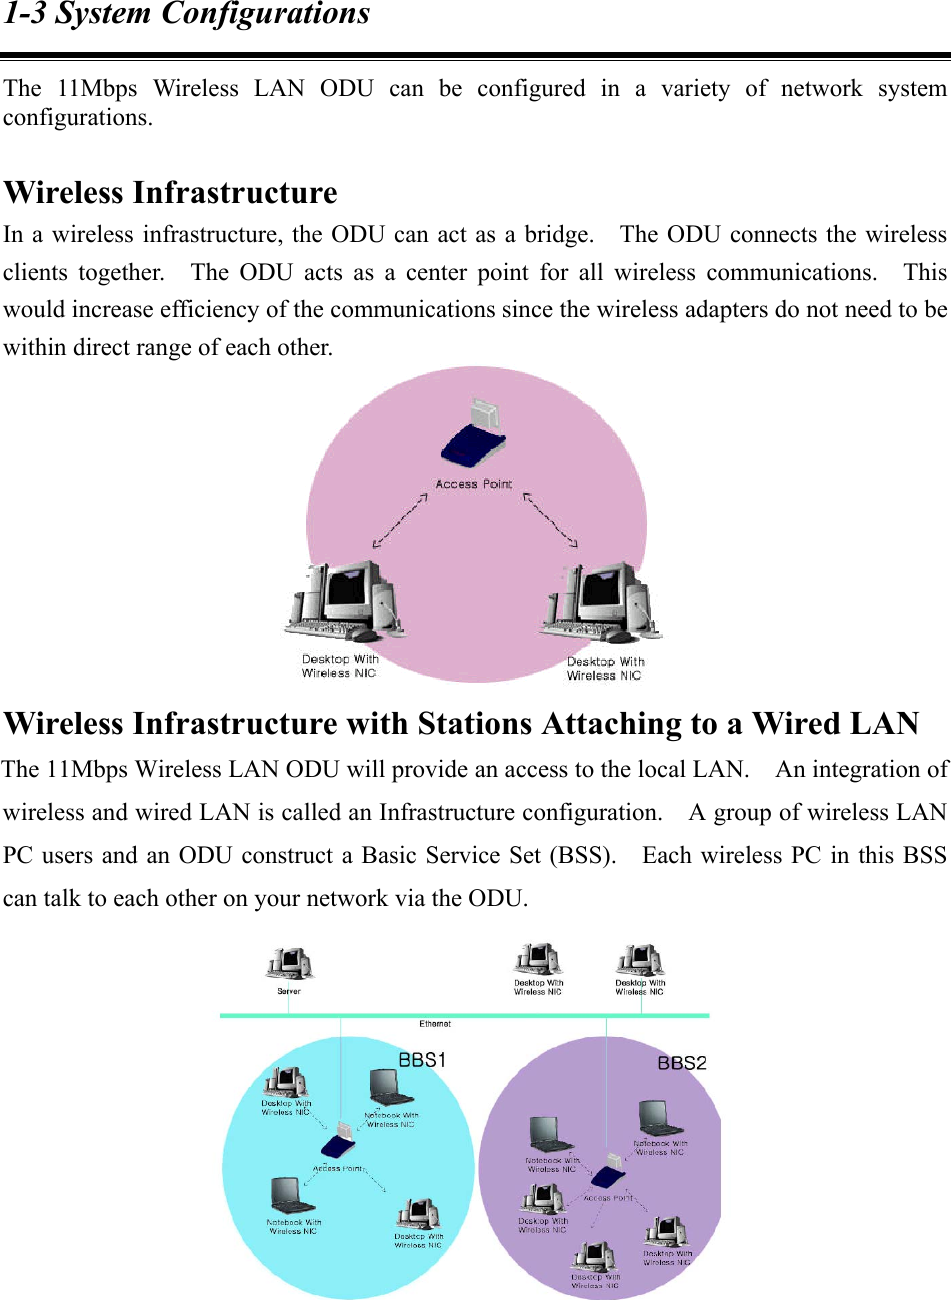 1-3 System Configurations The 11Mbps Wireless LAN ODU can be configured in a variety of network system configurations.  Wireless Infrastructure In a wireless infrastructure, the ODU can act as a bridge.    The ODU connects the wireless clients together.  The ODU acts as a center point for all wireless communications.  This would increase efficiency of the communications since the wireless adapters do not need to be within direct range of each other.  Wireless Infrastructure with Stations Attaching to a Wired LAN The 11Mbps Wireless LAN ODU will provide an access to the local LAN.    An integration of wireless and wired LAN is called an Infrastructure configuration.    A group of wireless LAN PC users and an ODU construct a Basic Service Set (BSS).    Each wireless PC in this BSS can talk to each other on your network via the ODU.      